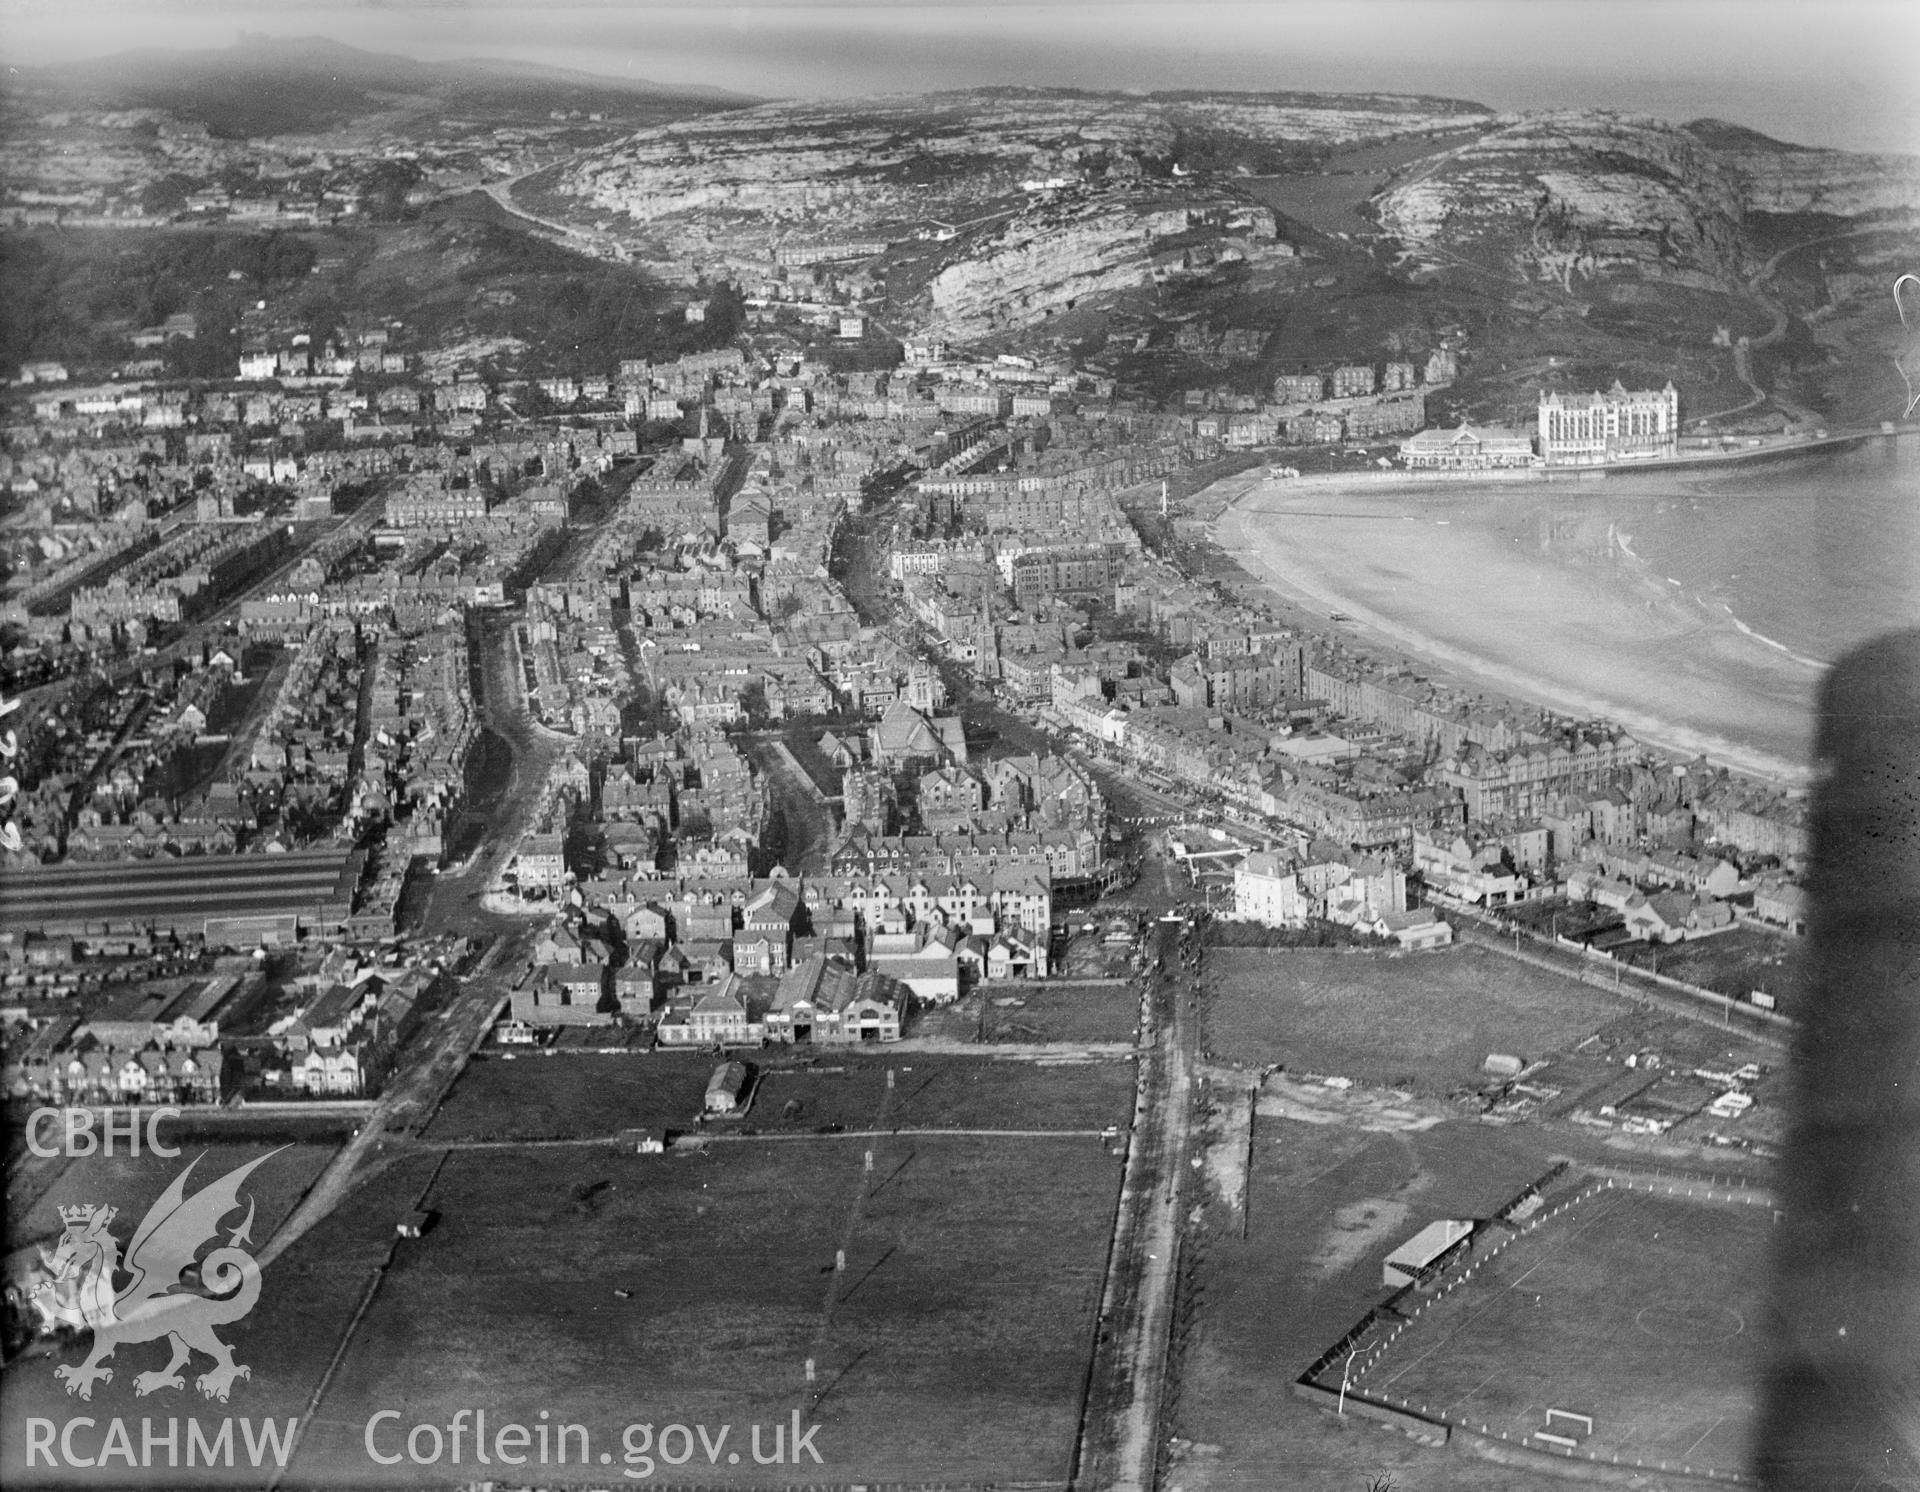 General view of Llandudno showing football ground, oblique aerial view. 5?x4? black and white glass plate negative.